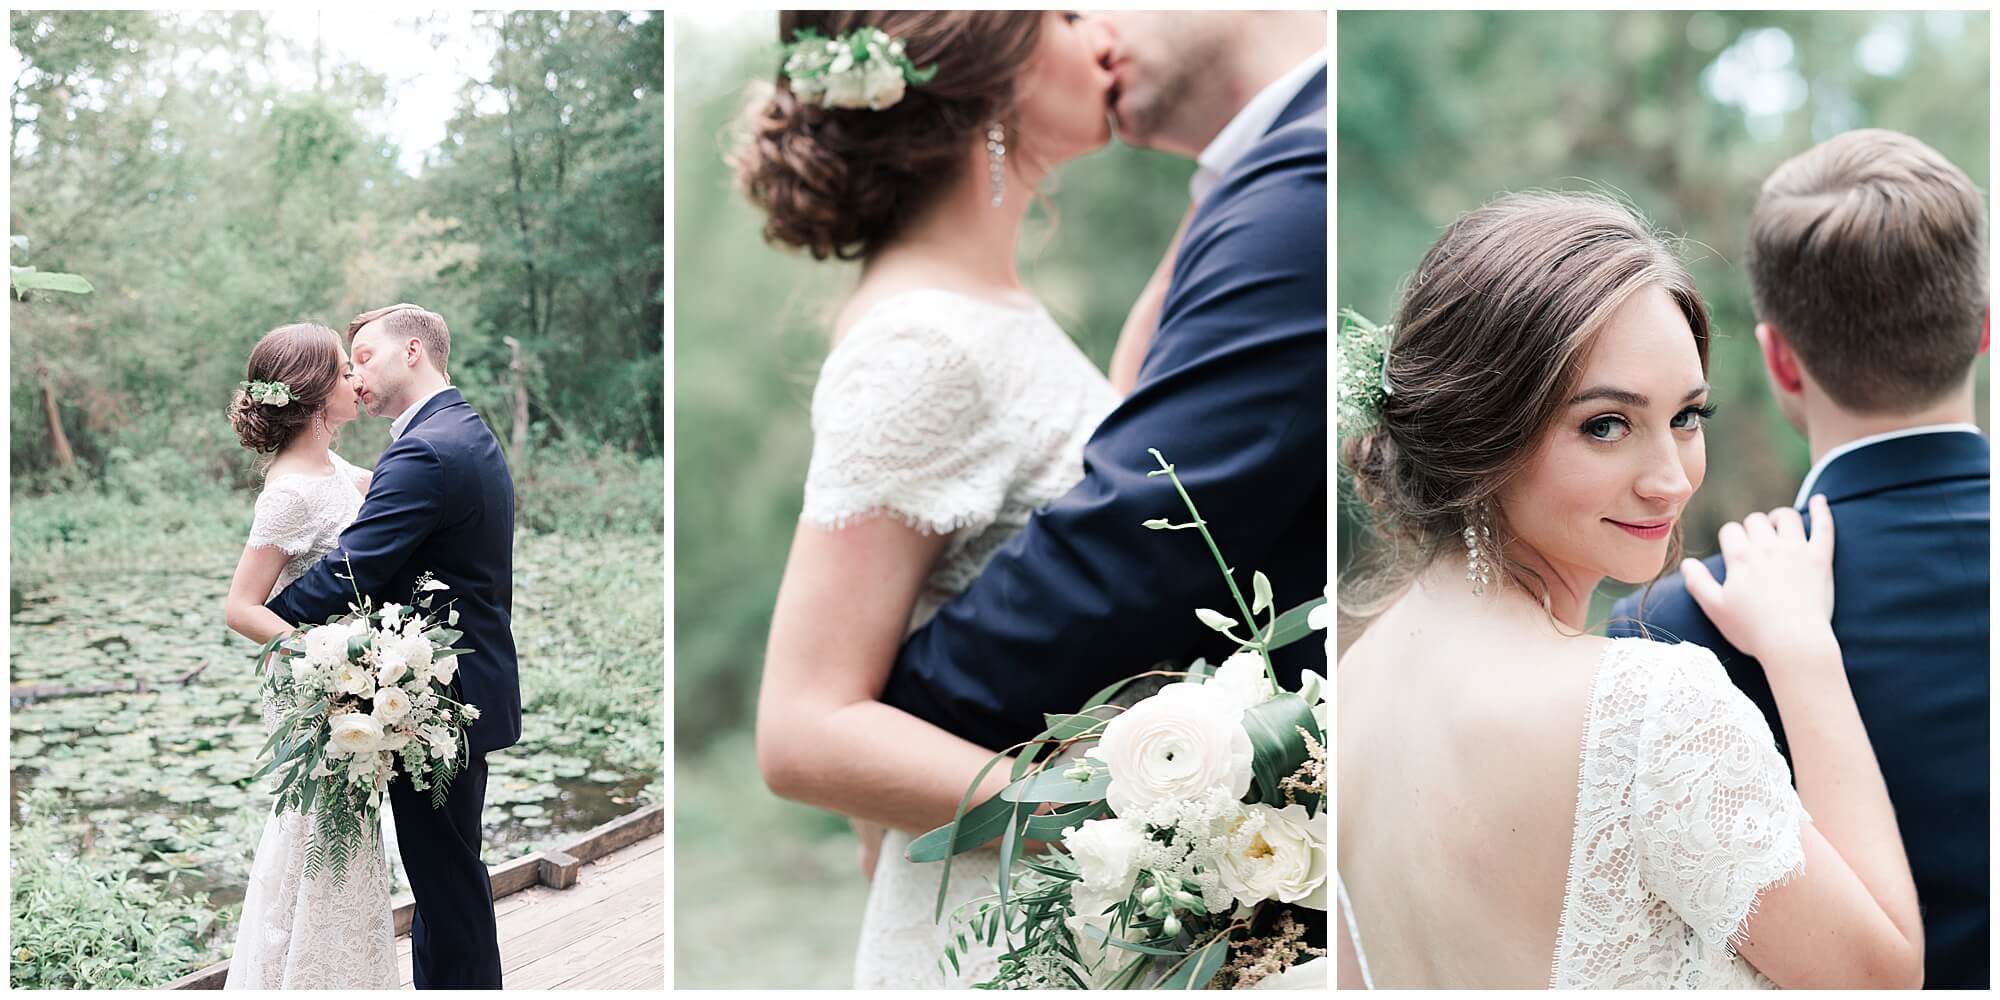 bride and groom portraits at the Houston Arboretum in Houston Texas by wedding photographer Swish and Click